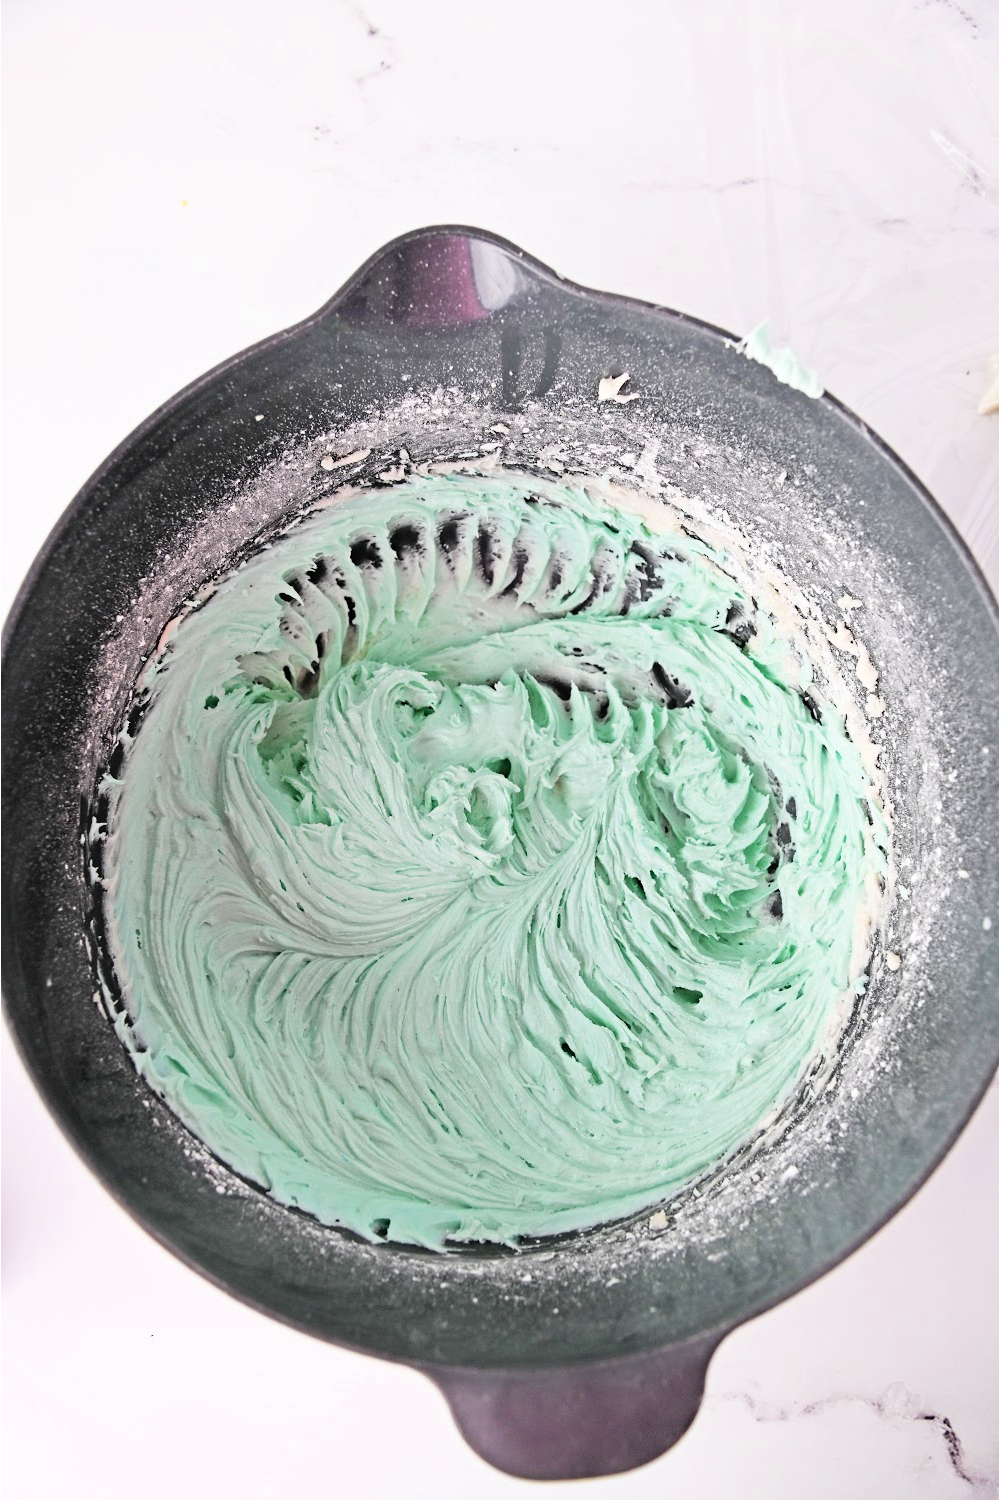 for teal shark cupcake icing add 3-4 drops of teal food coloring, and mix to combine.